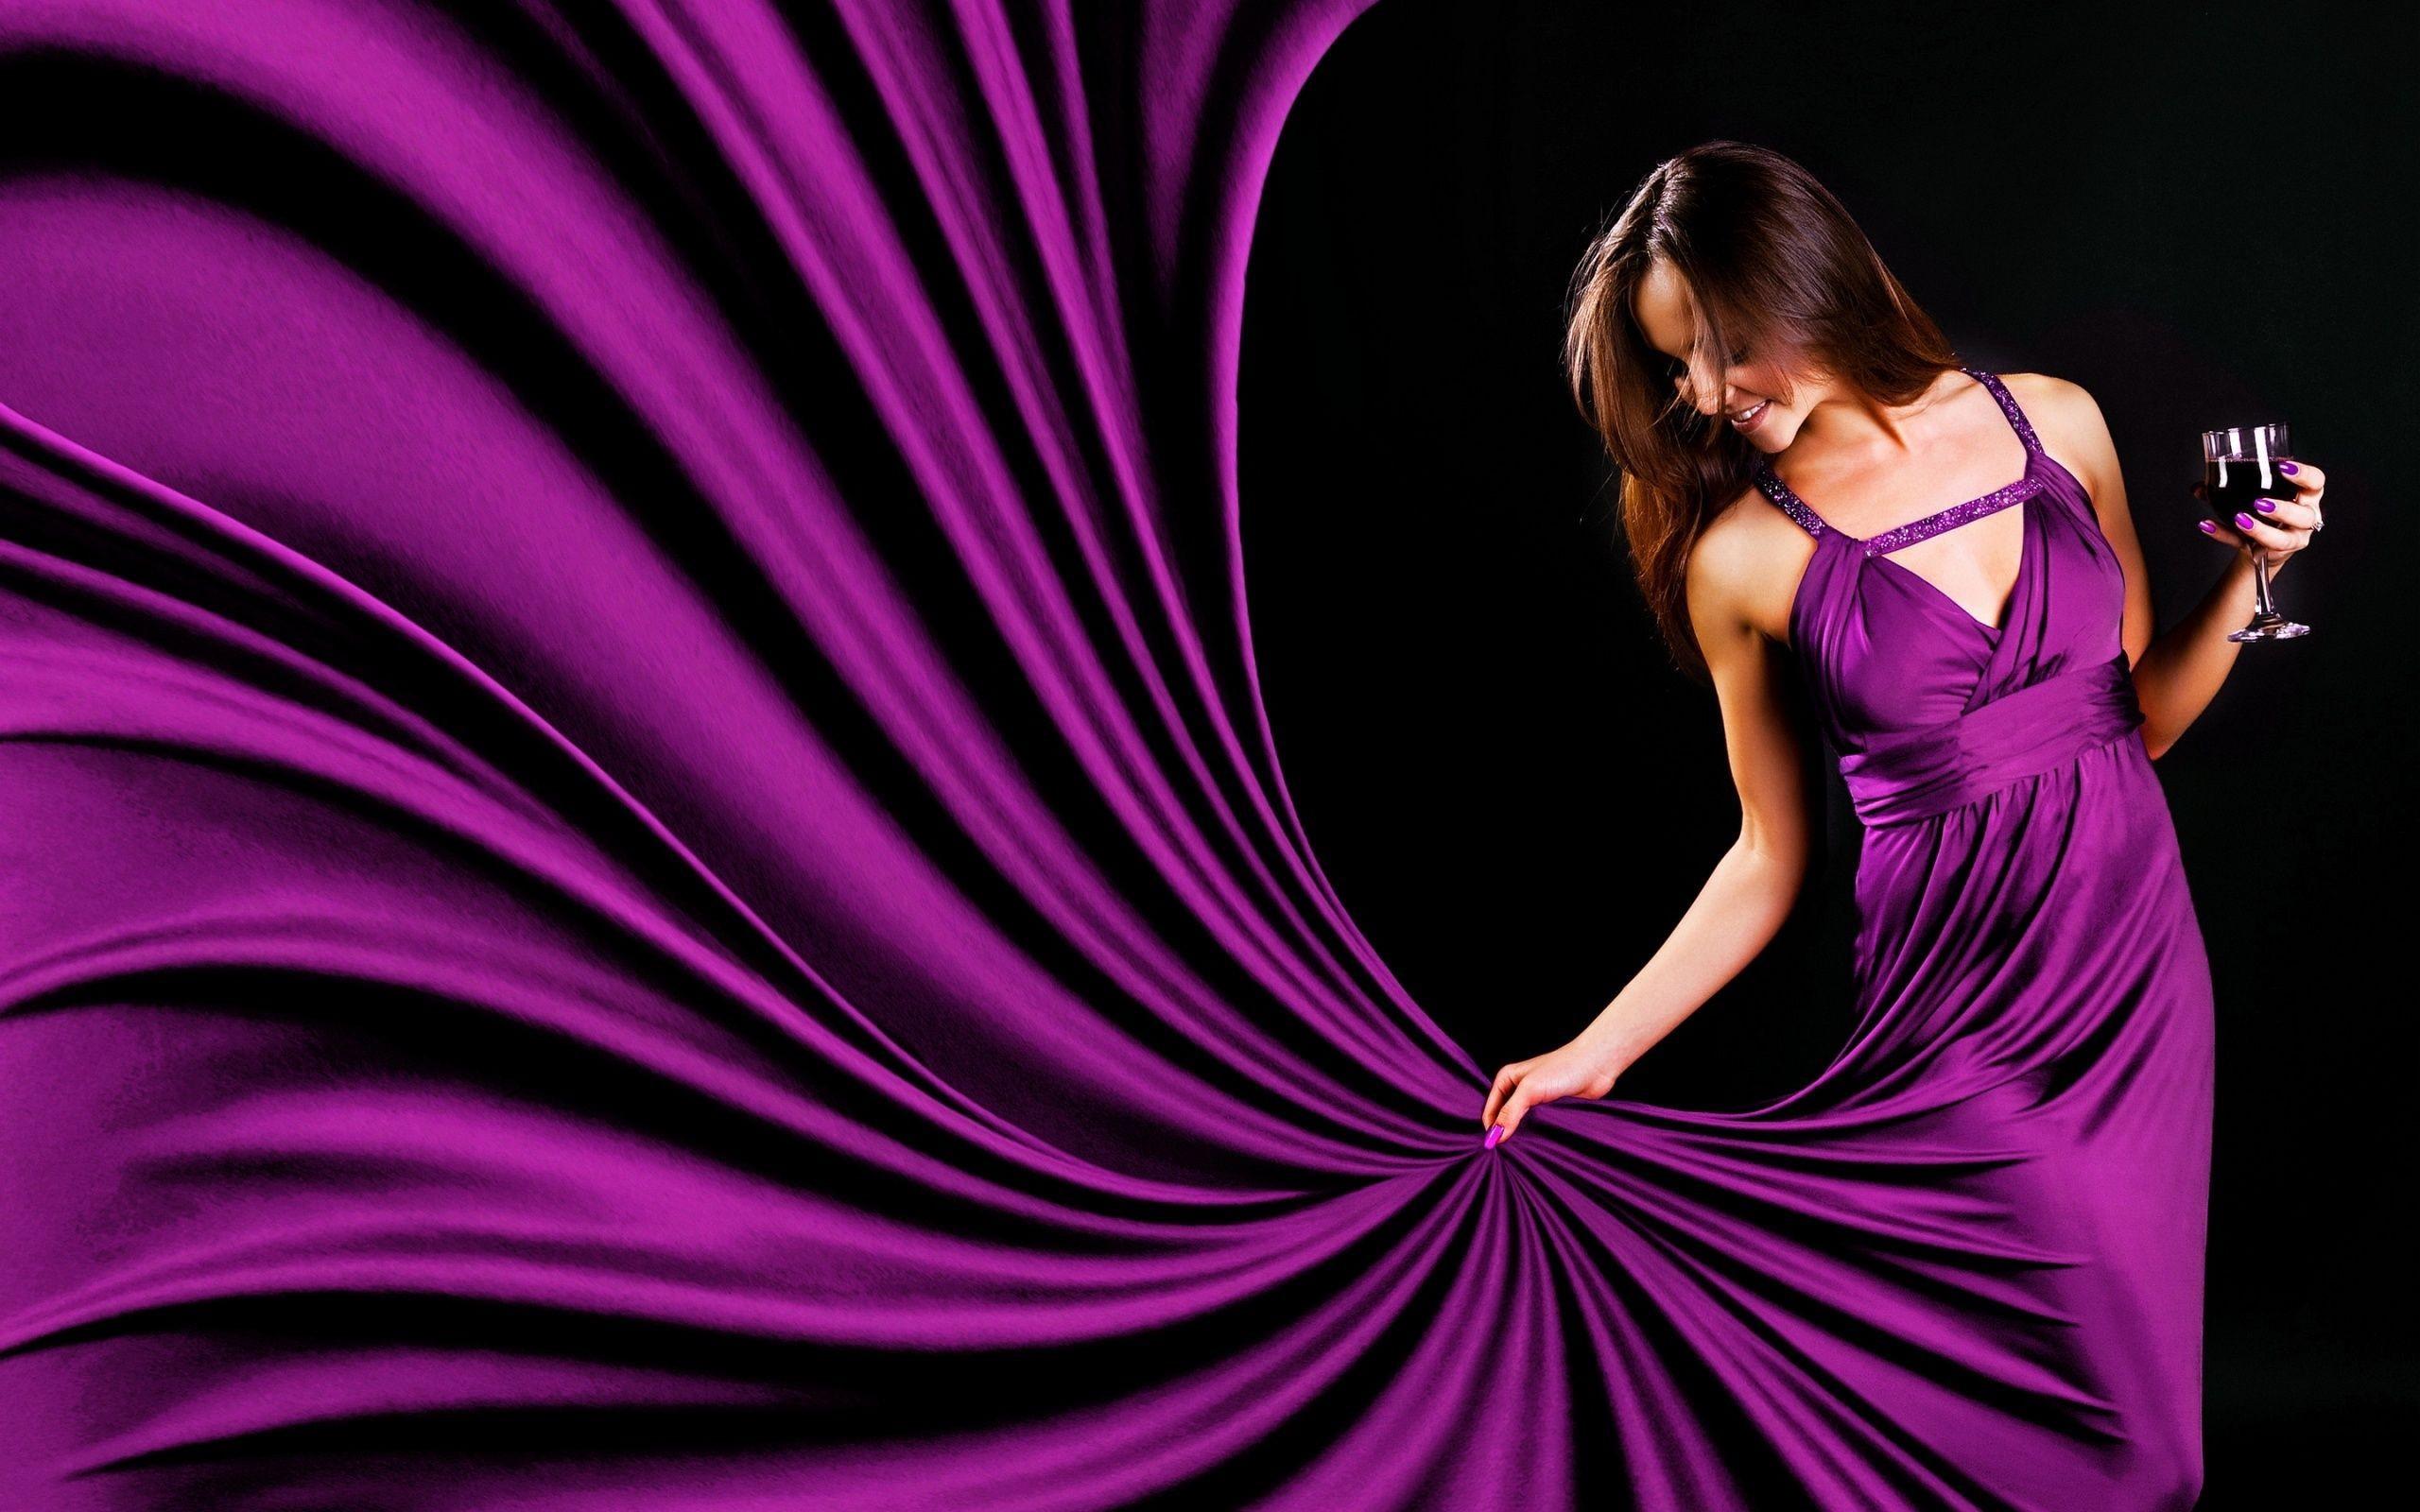 Girl in purple dress wallpaper and image, picture